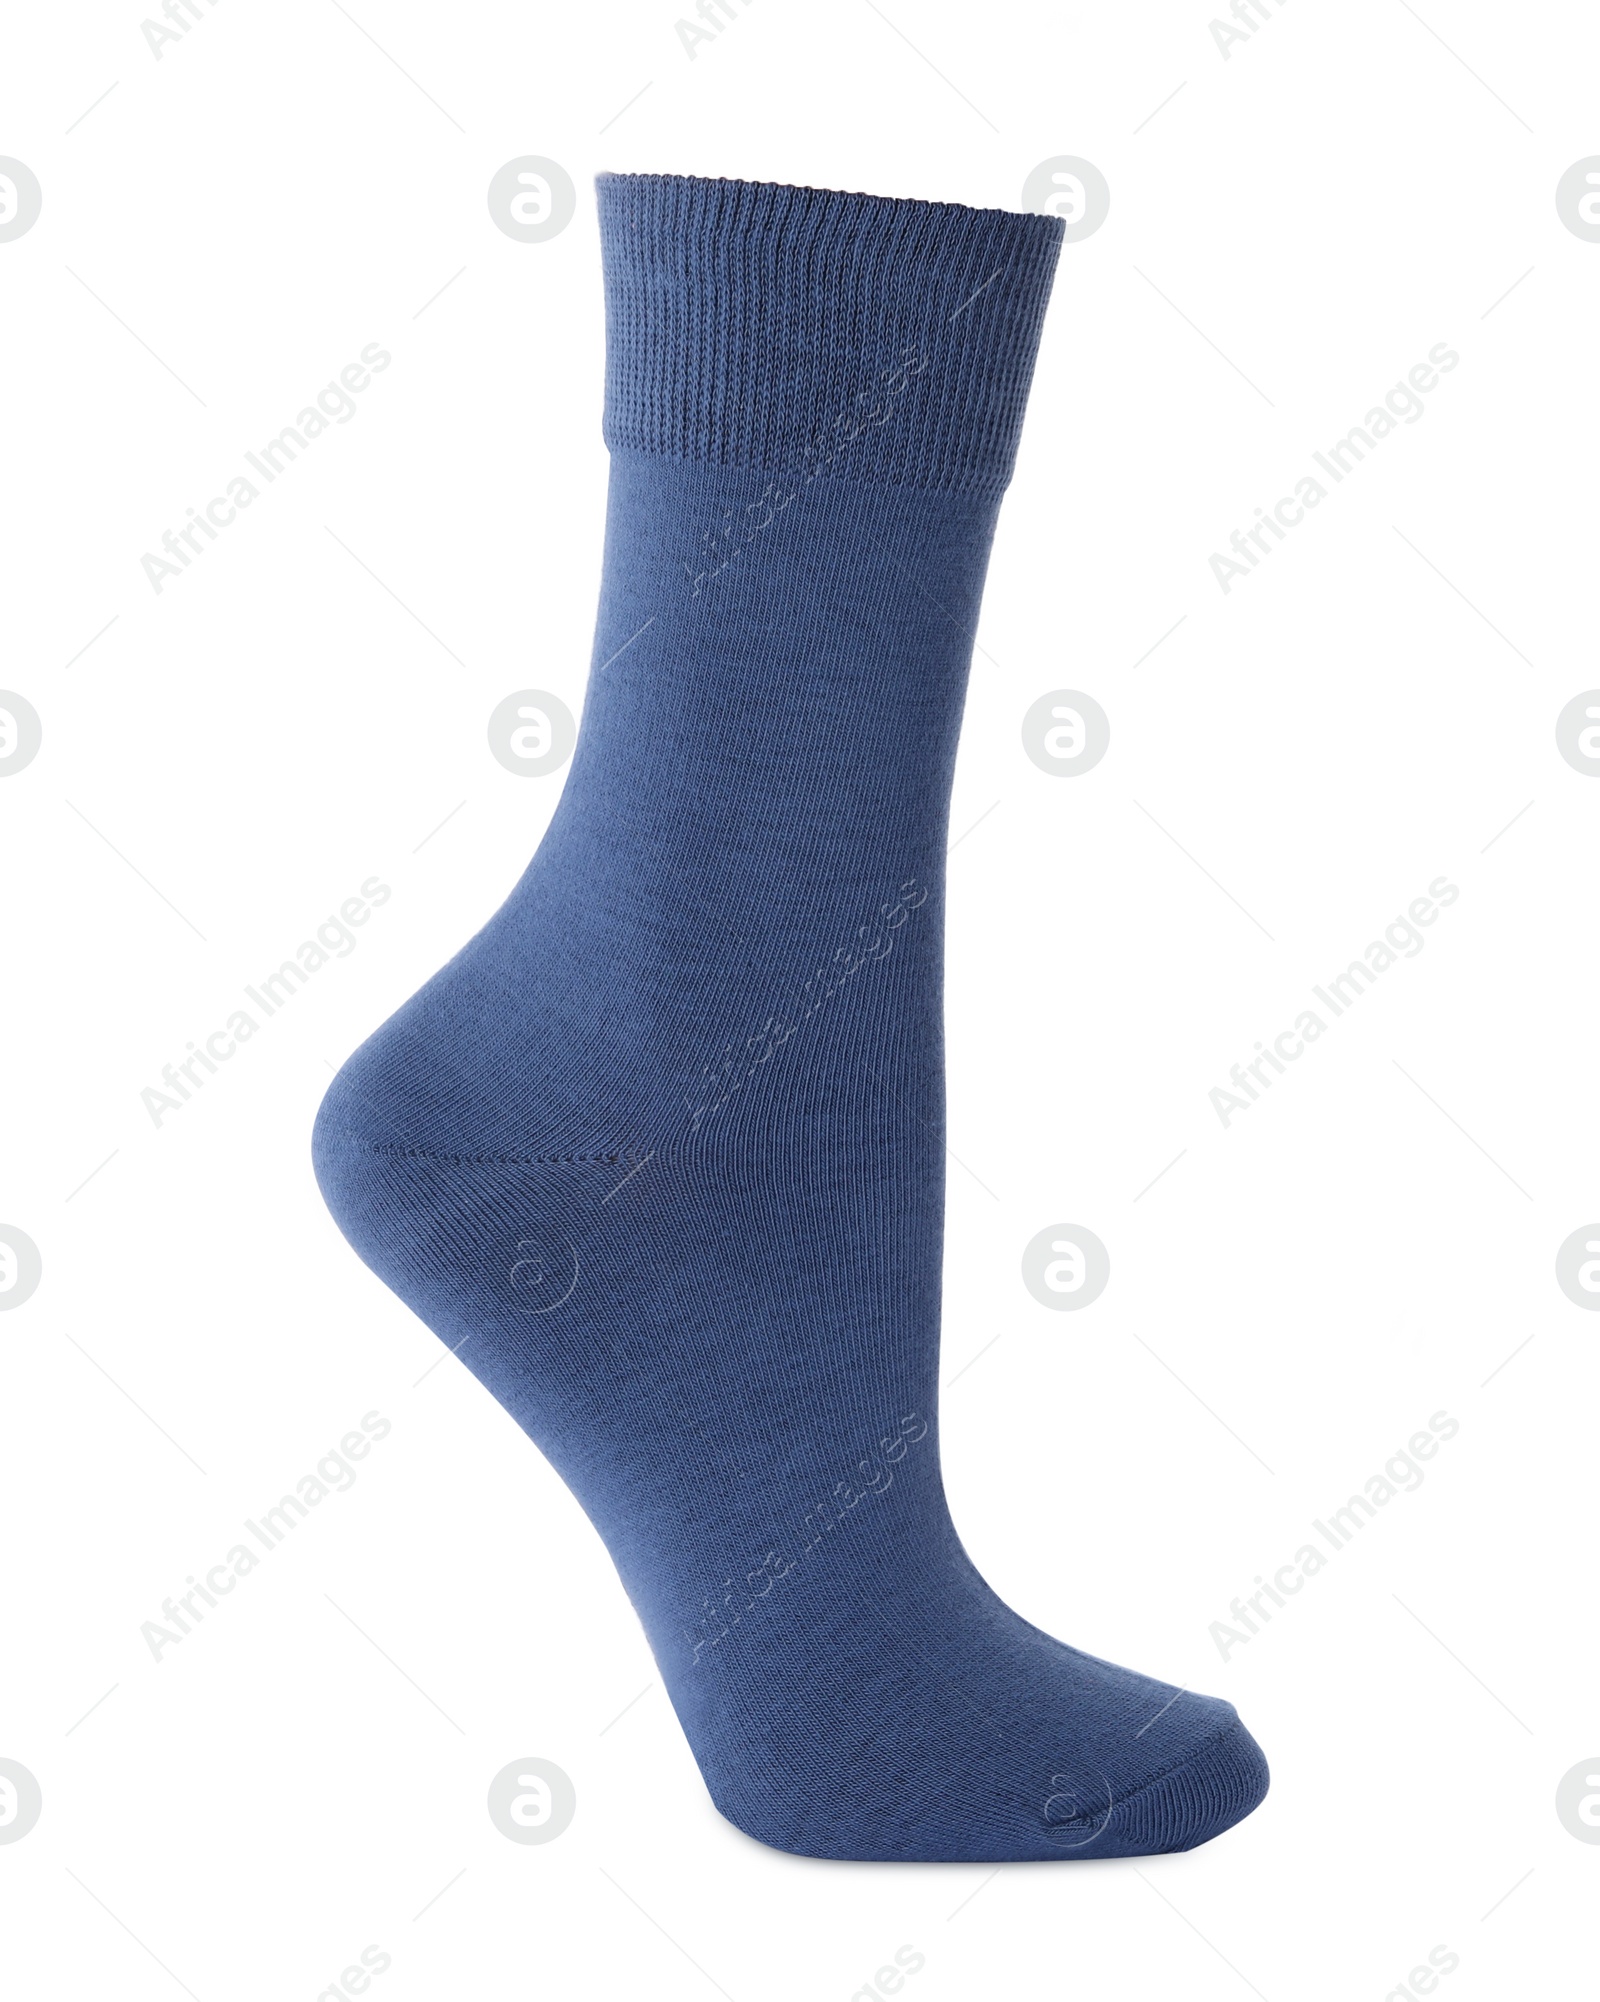 Photo of One new dark blue sock isolated on white